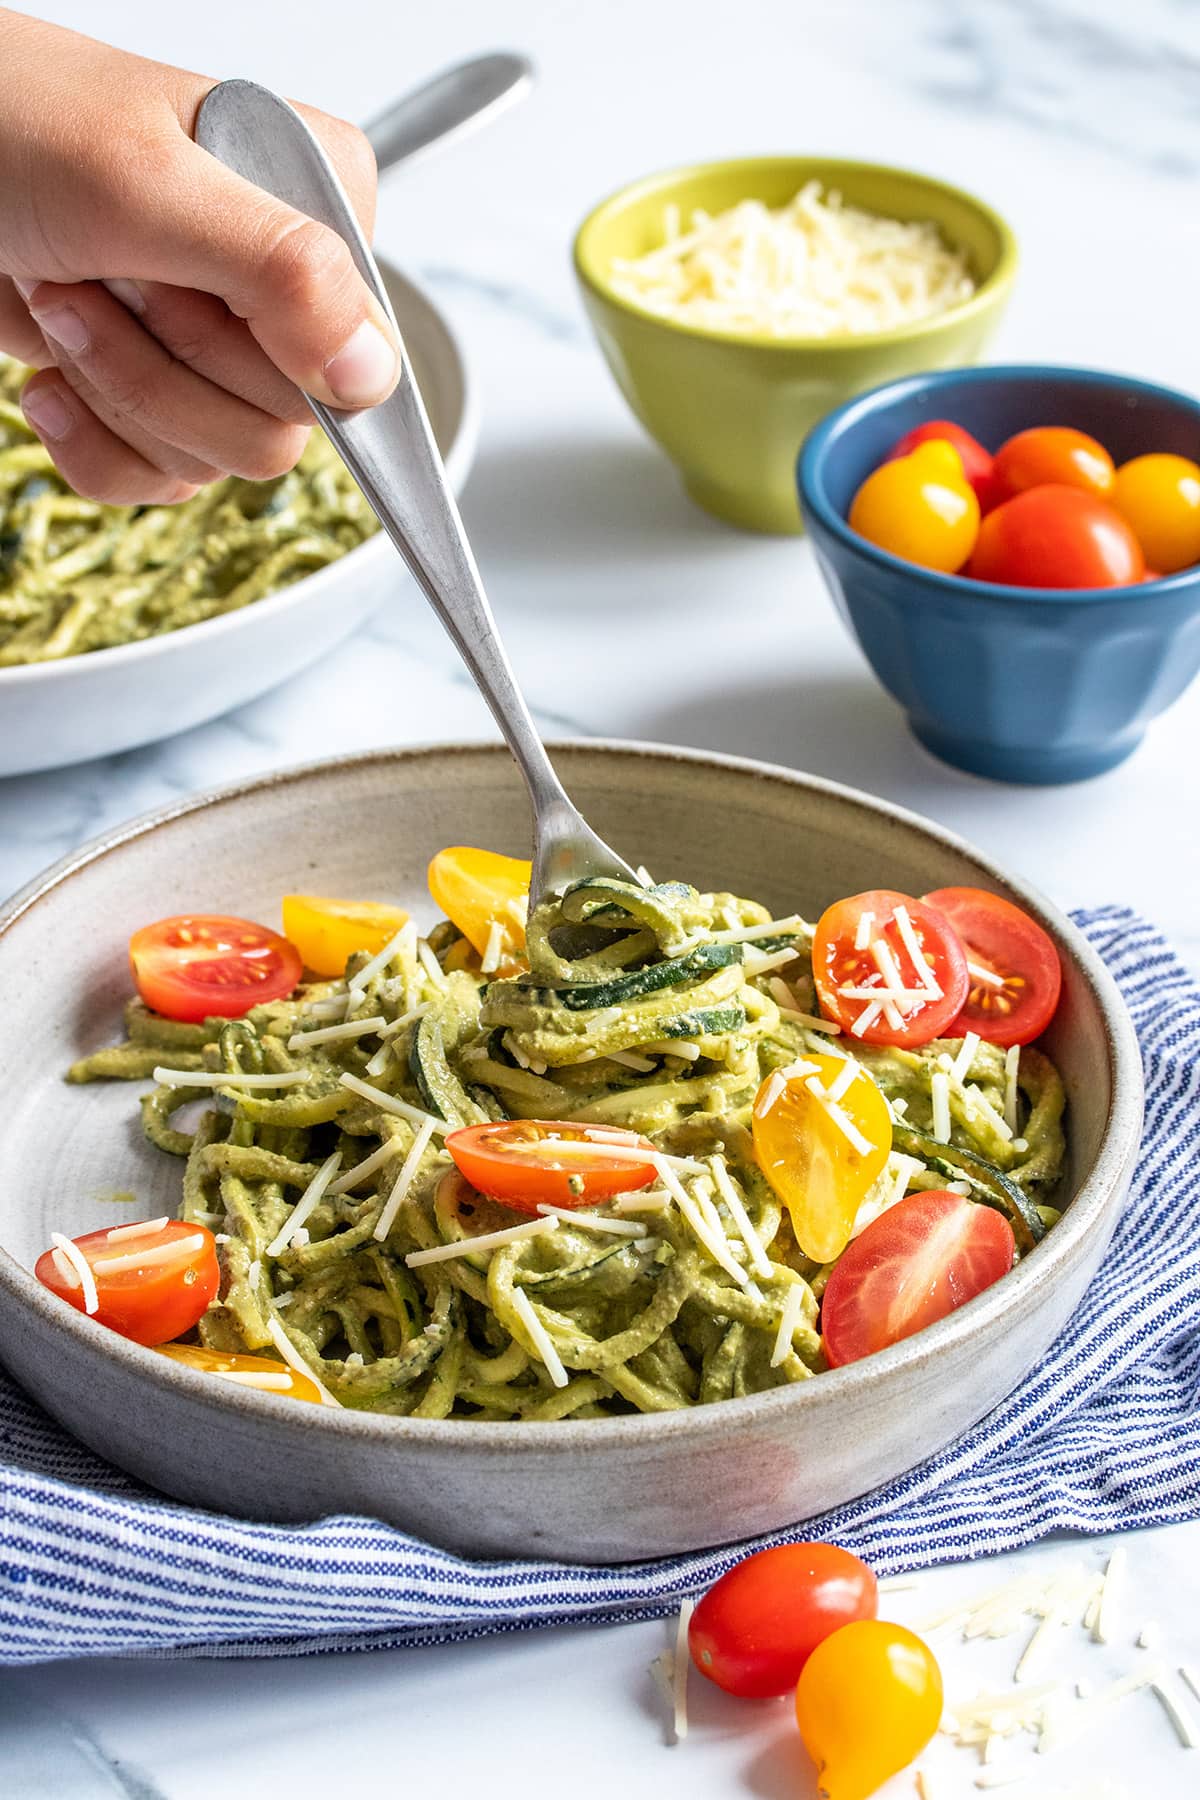 A hand holding a fork that is twisting pesto covered zucchini noodles onto it from a grey plate with tomatoes too.